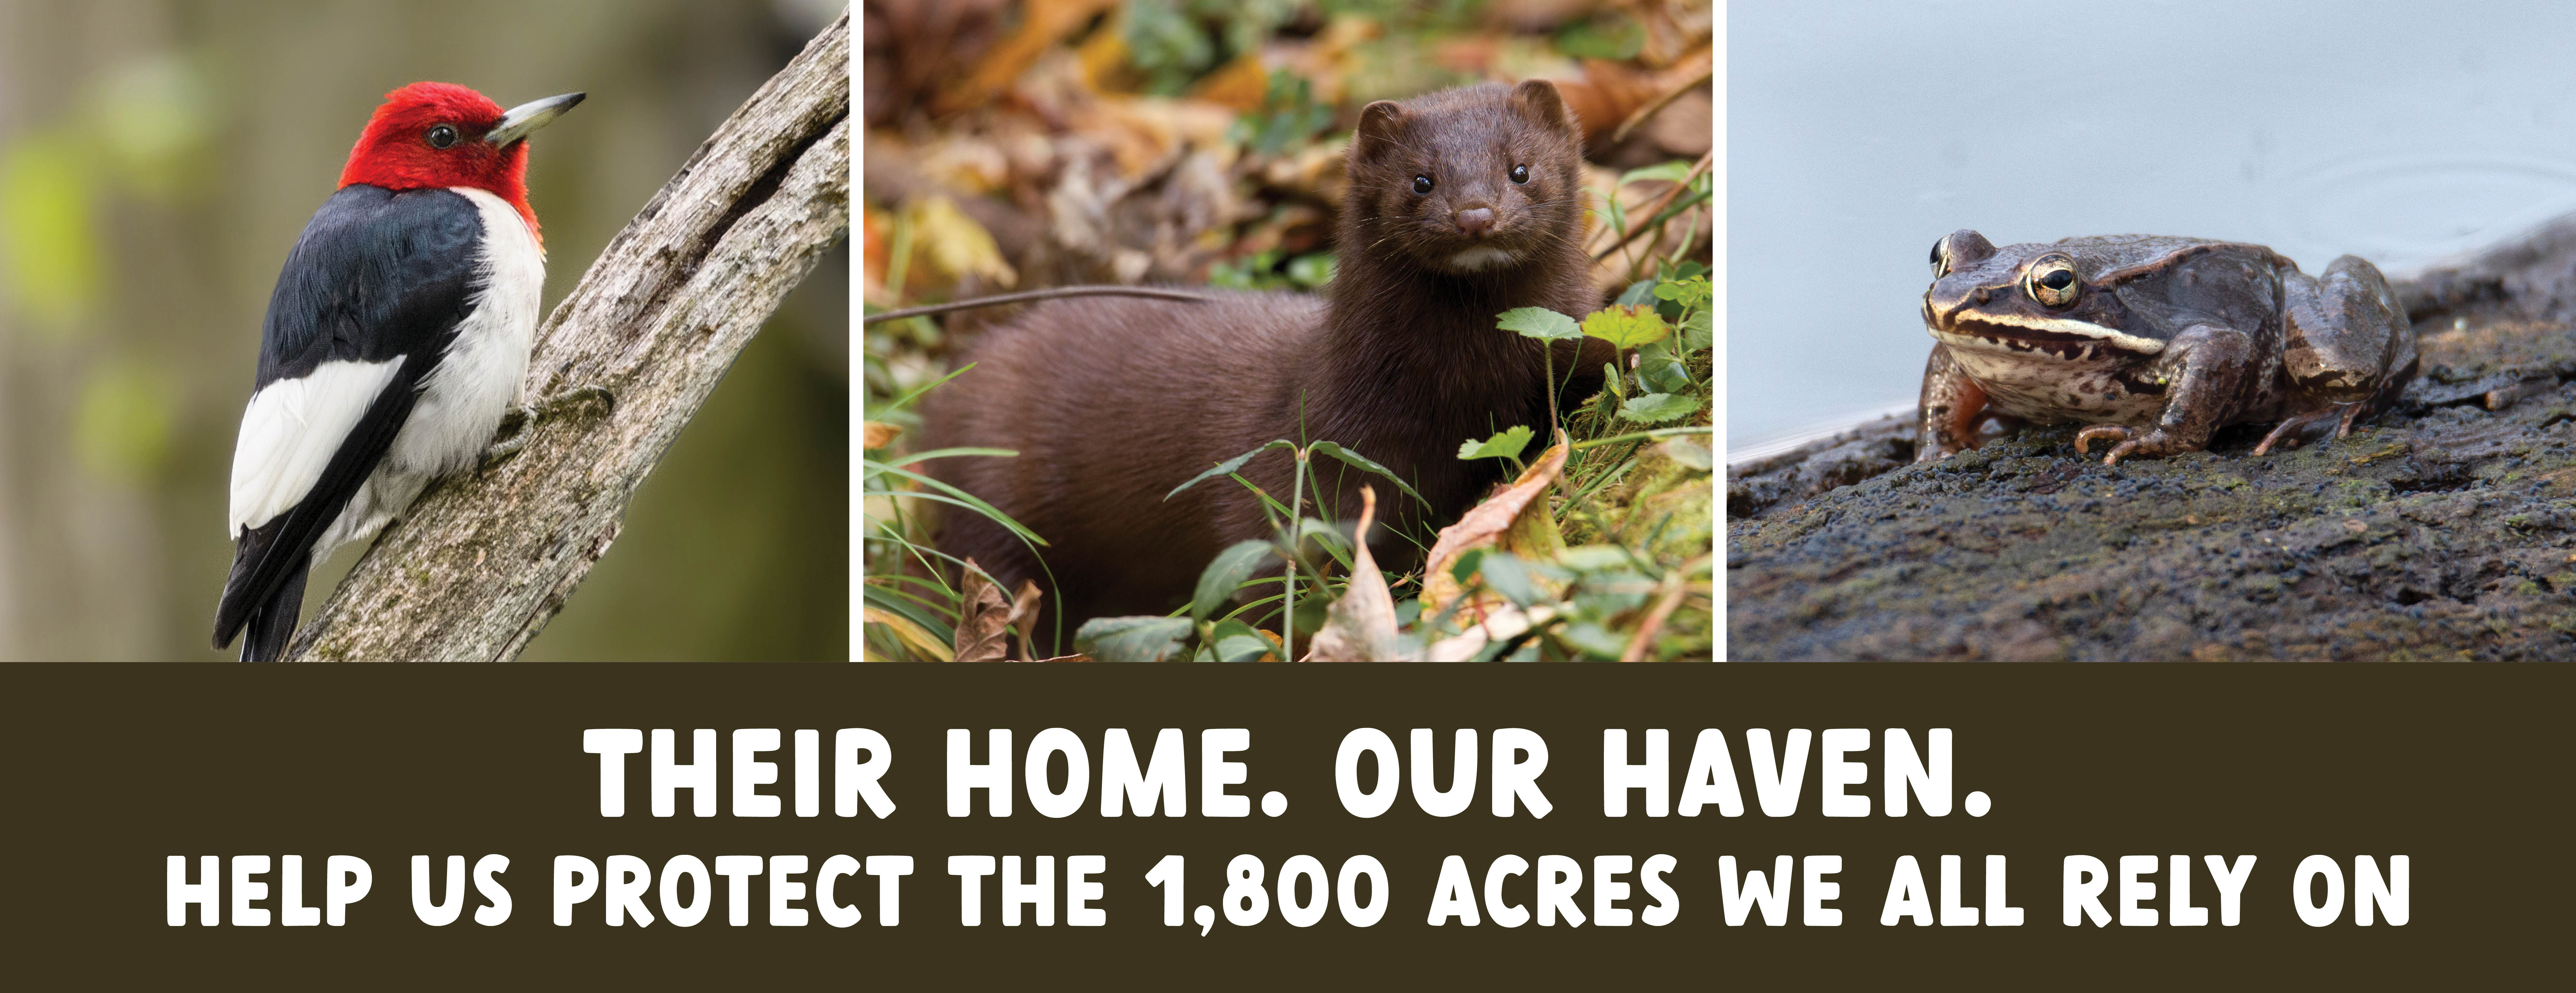 An image of a Red-headed woodpecker, an American mink and a Wood frog with text underneath that says, "Their Home. Our Haven. Help us protect the 1,800 acres we all rely on."